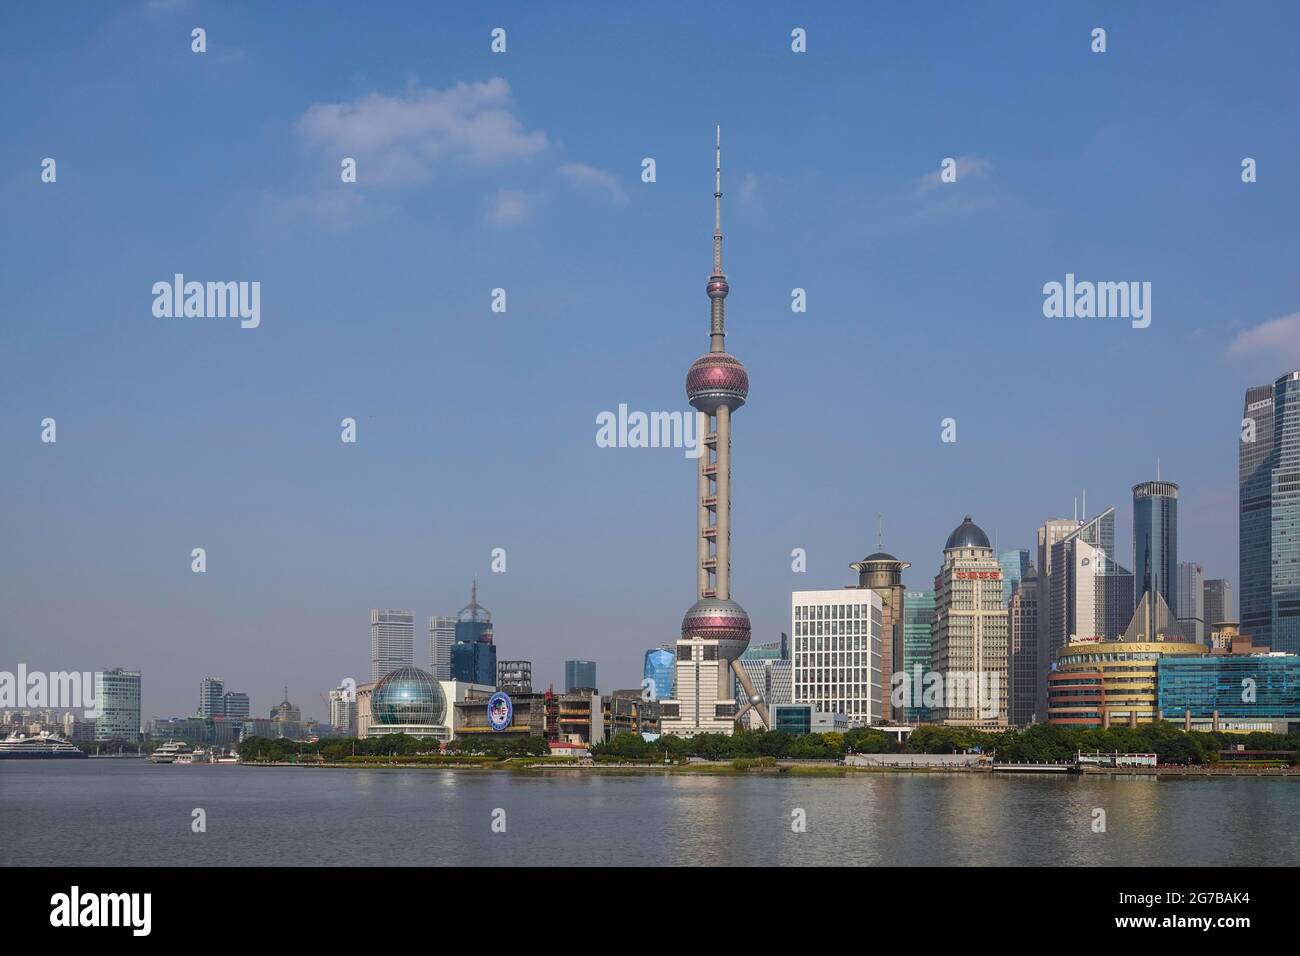 View over the Huangpu River to the skyline of the special economic zone Pudong with Oriental Pearl Tower, Shanghai, People's Republic of China Stock Photo